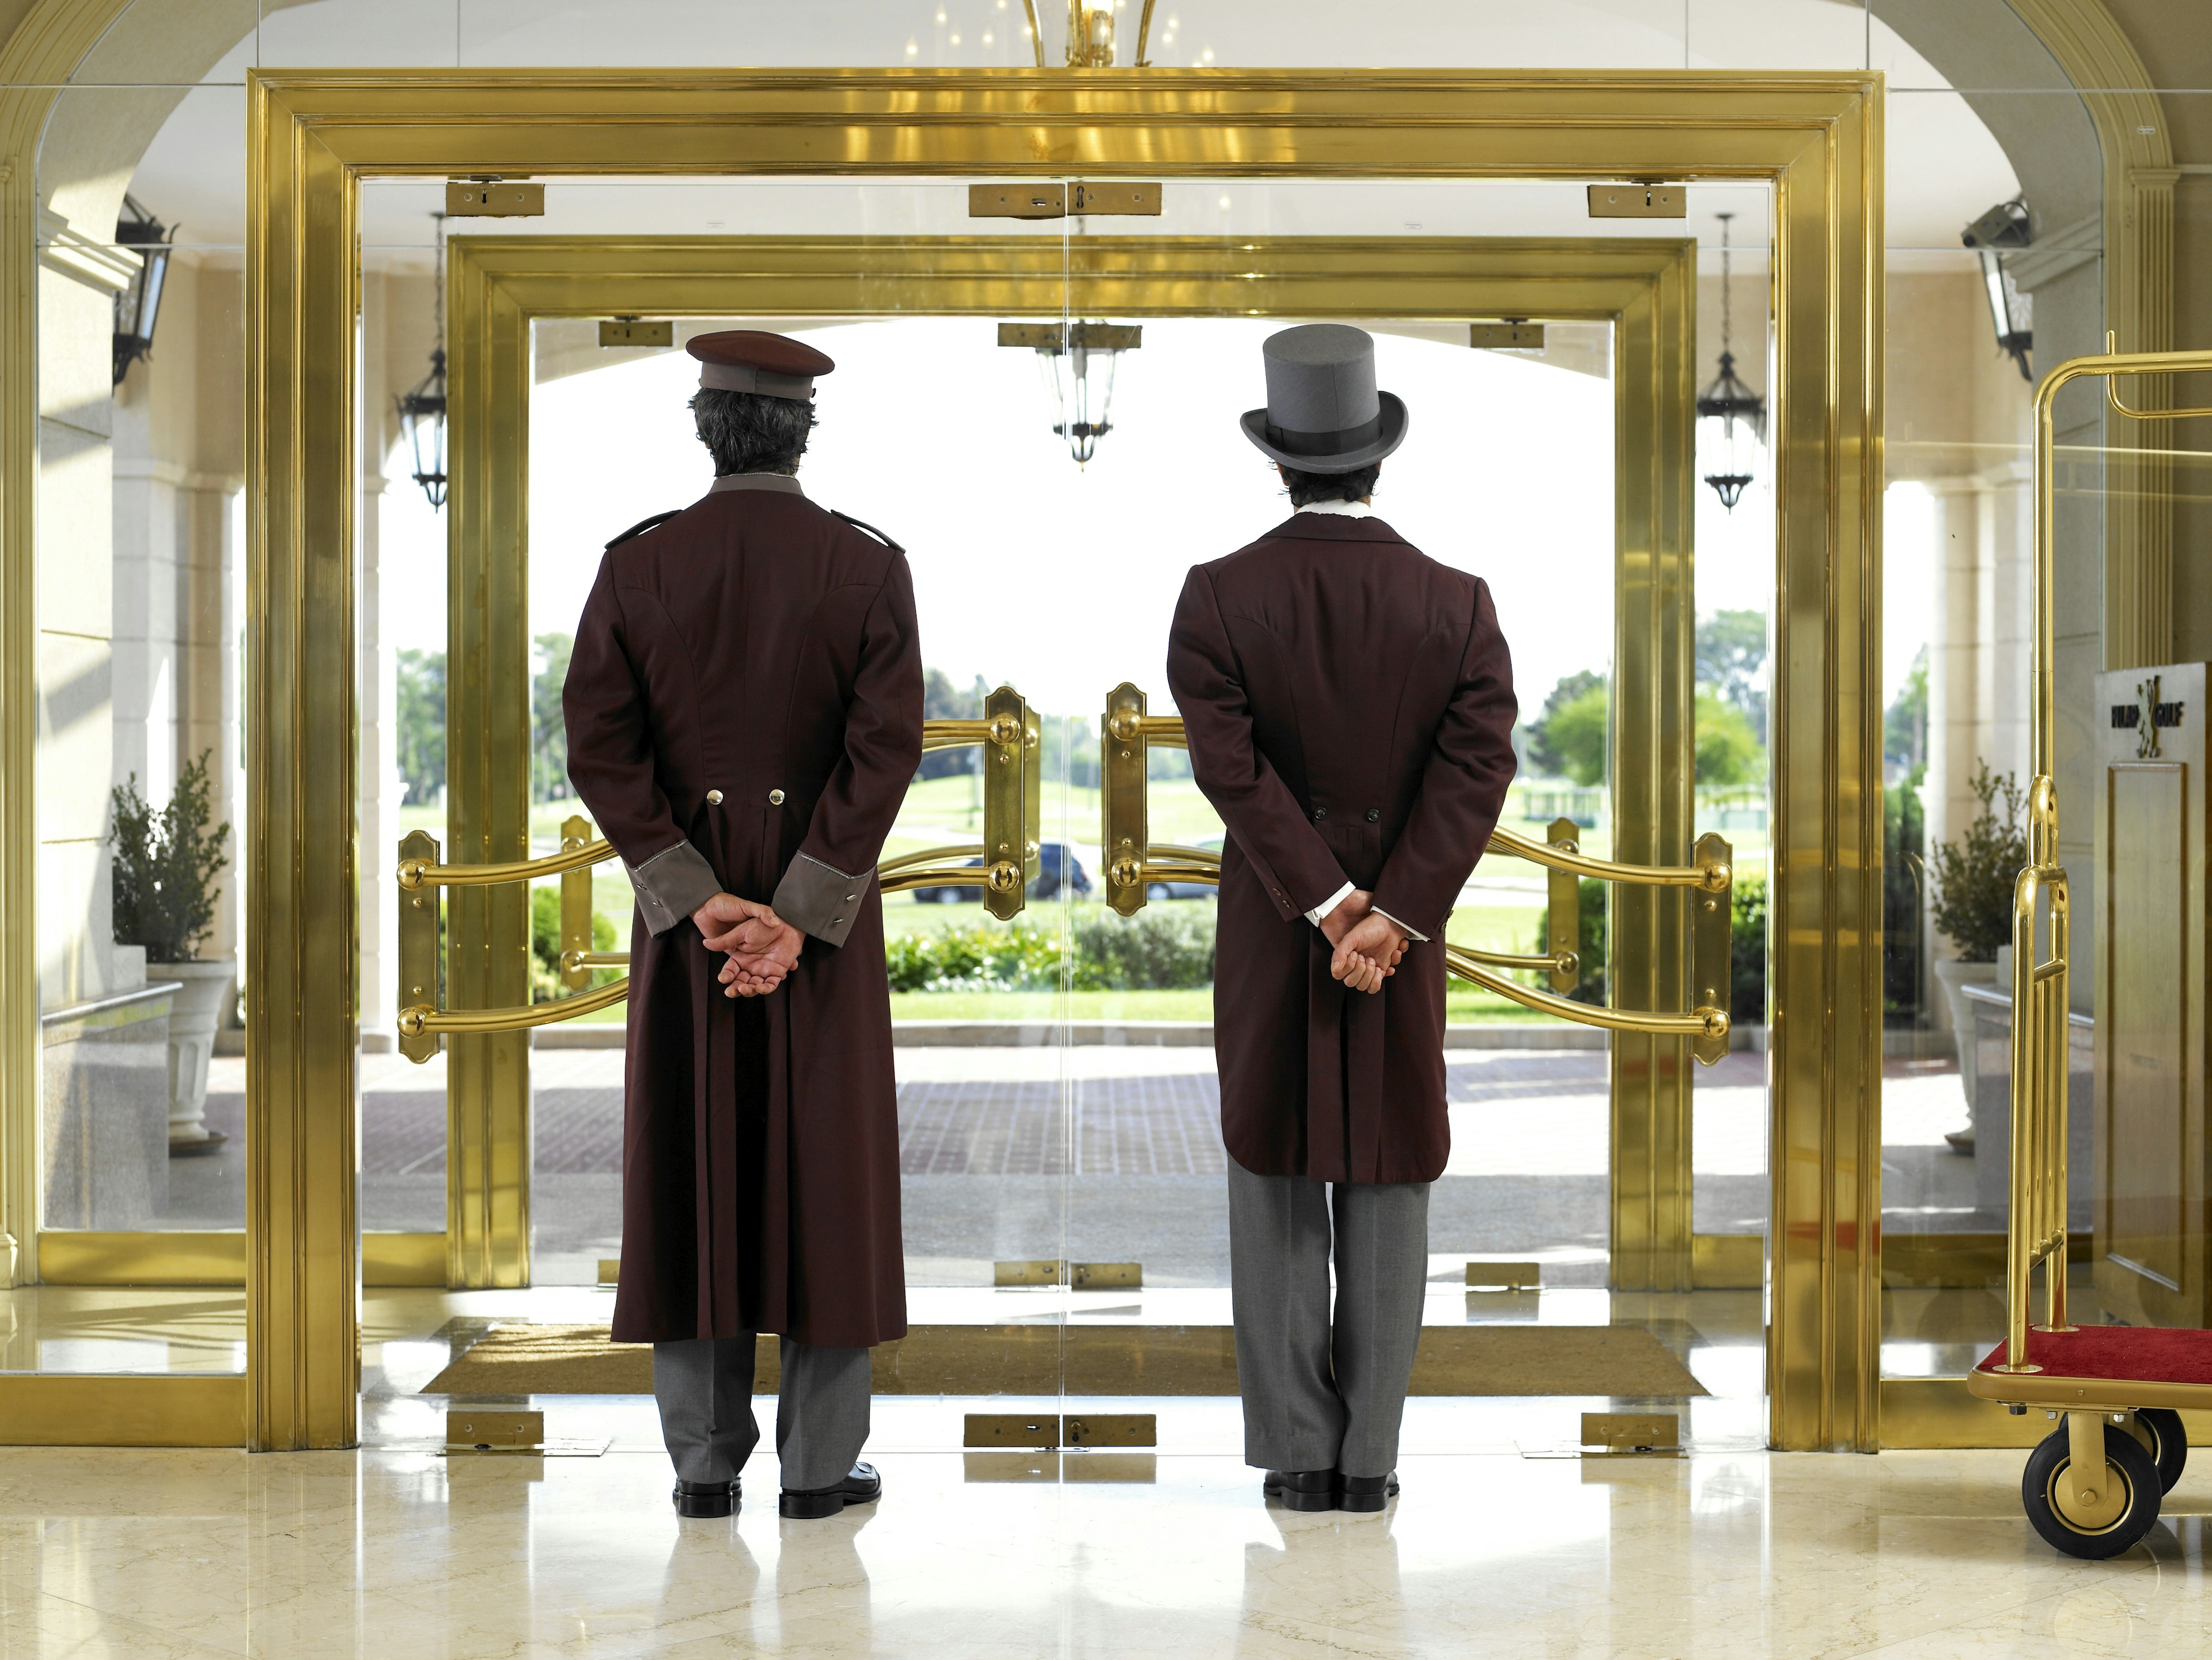 Concierge and bellboy standing at a hotel entrance and looking out the door.